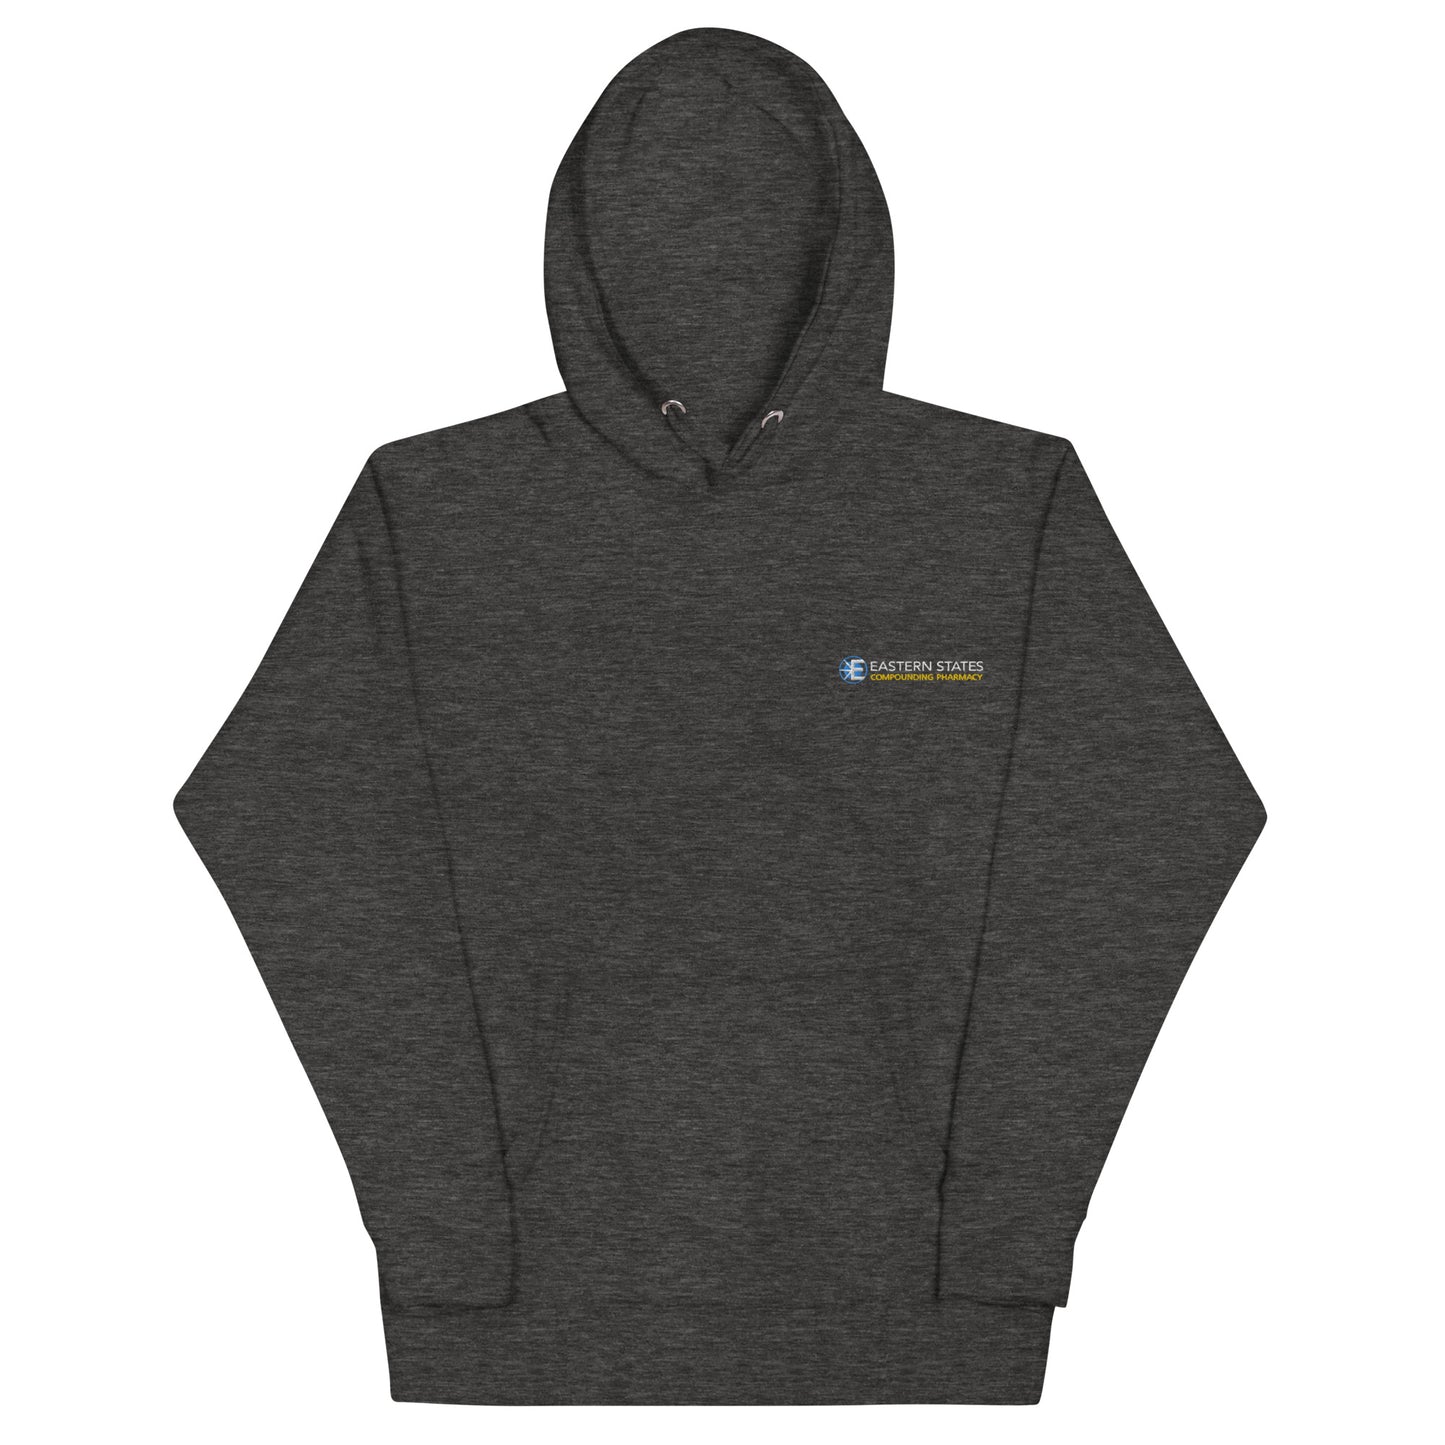 Unisex Premium Hoodie (fitted cut) - Eastern States